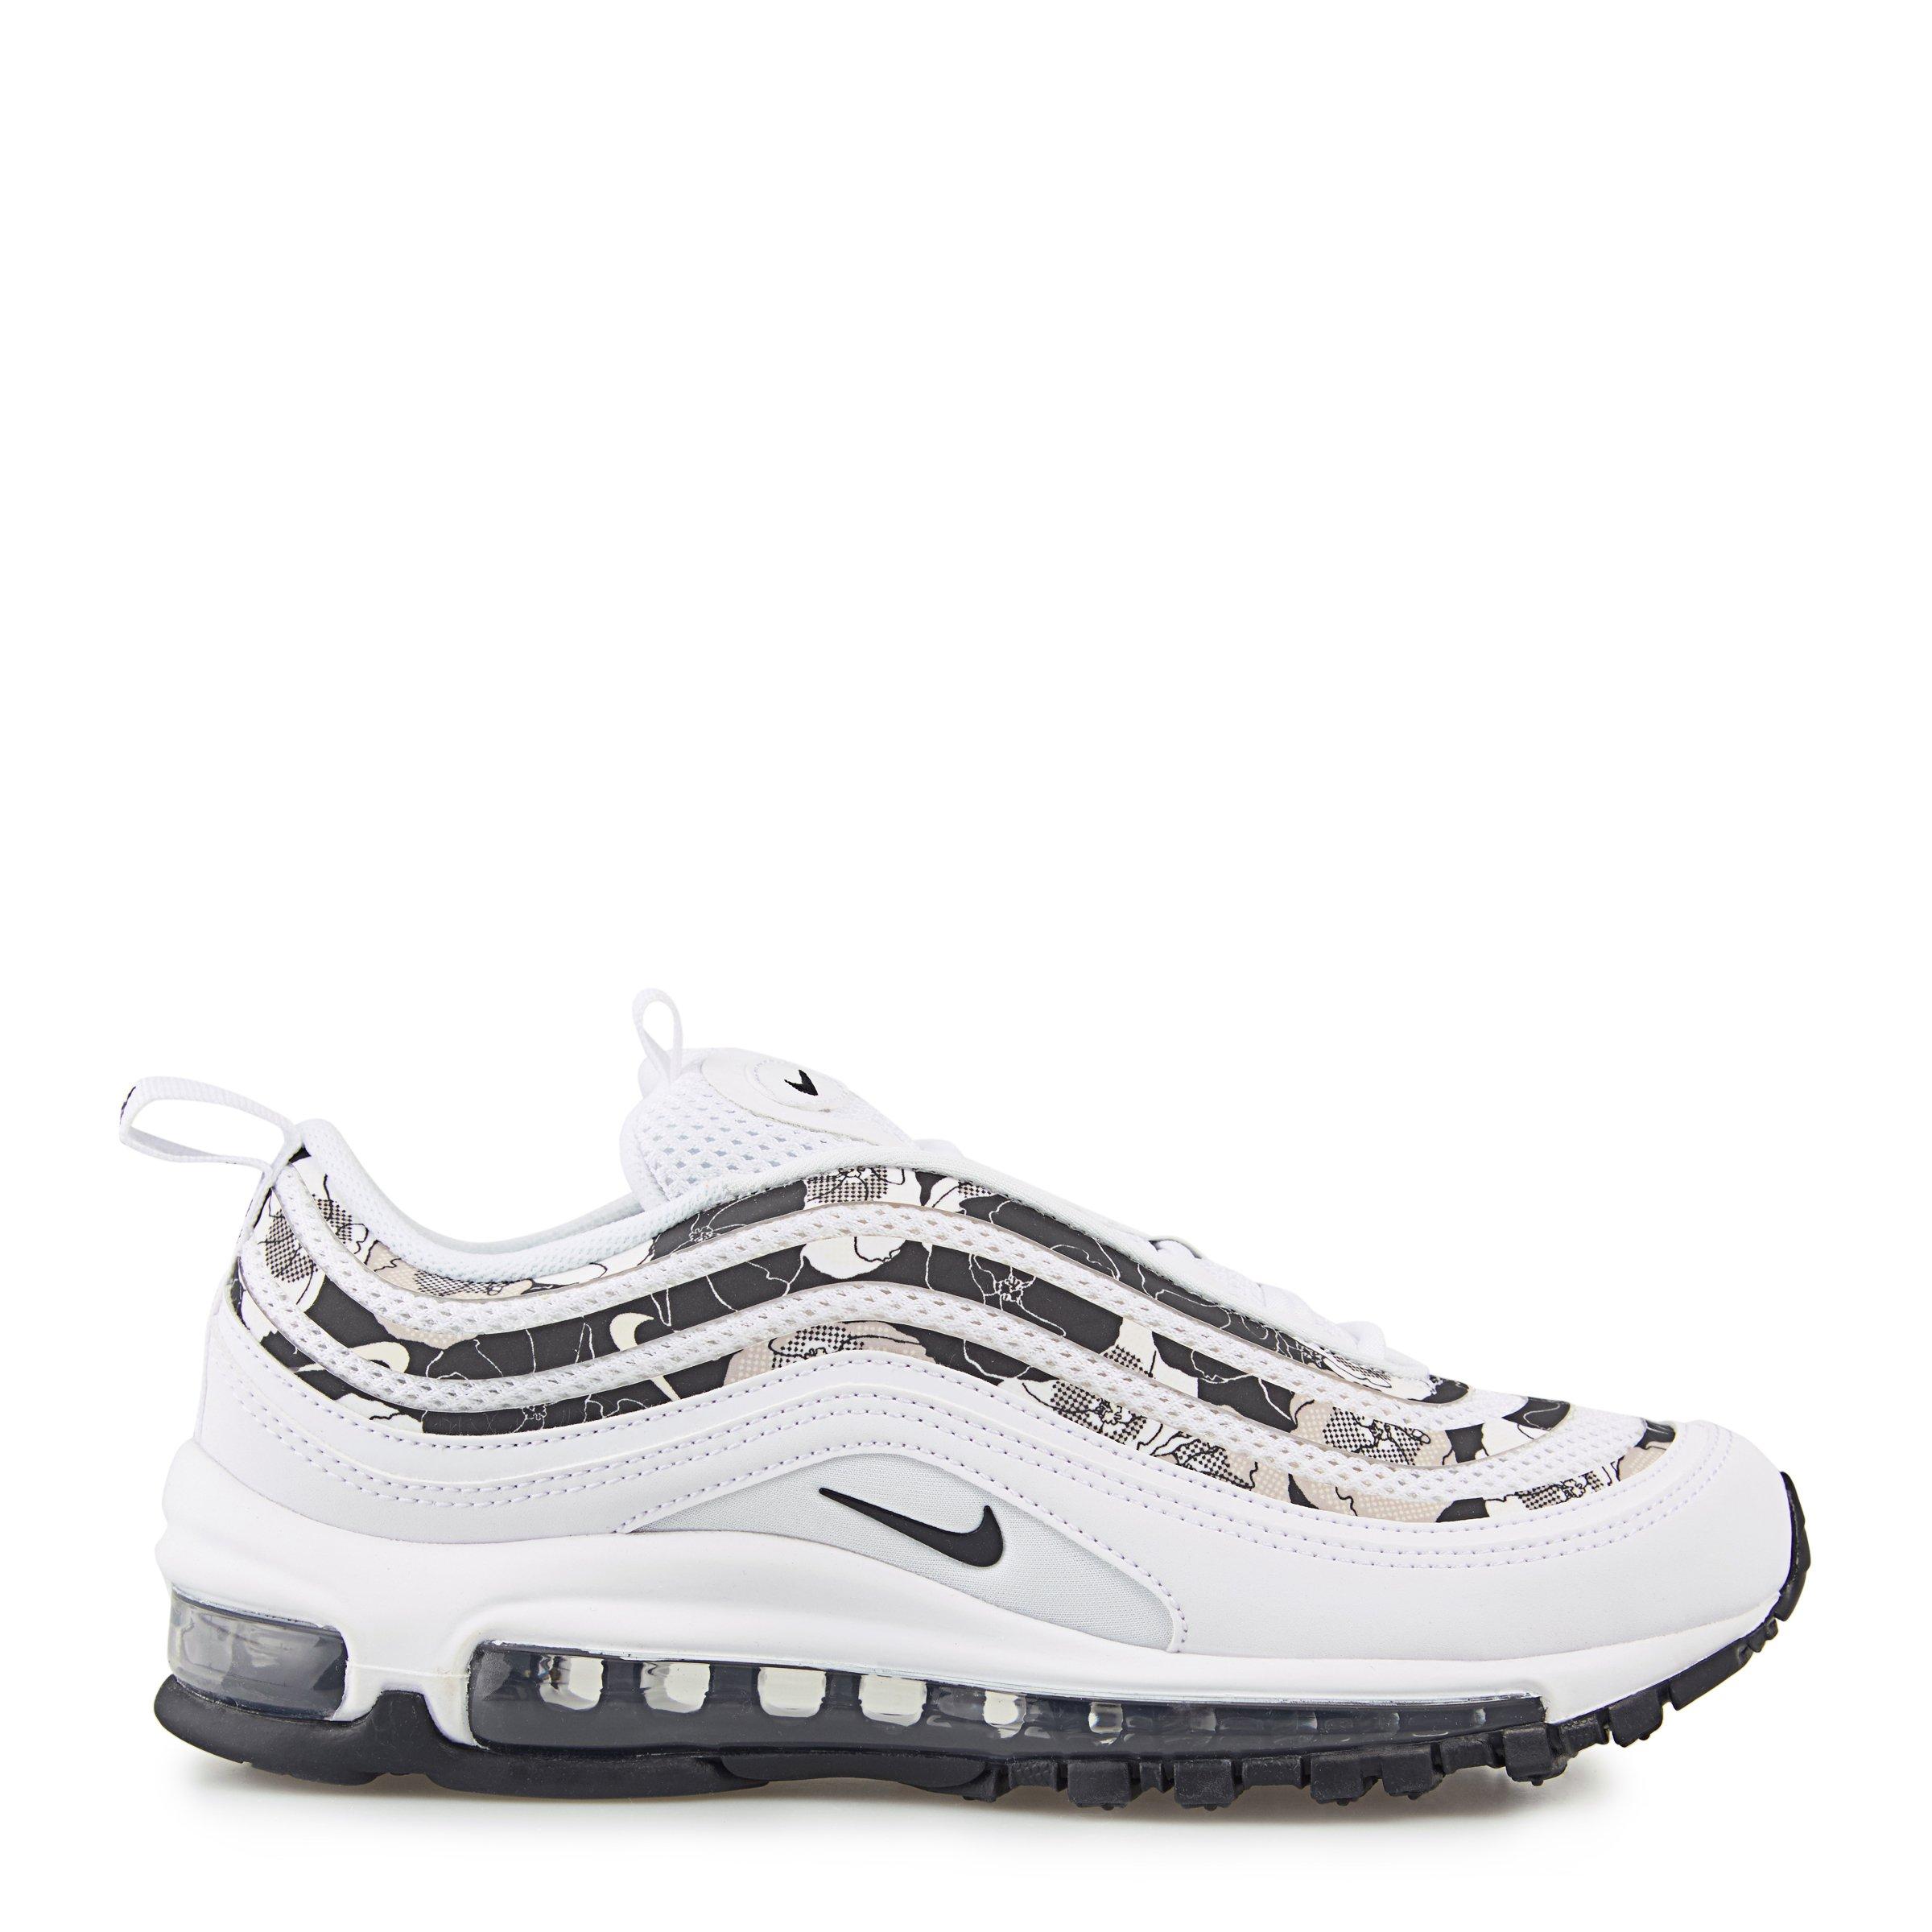 office shoes nike air max 97 